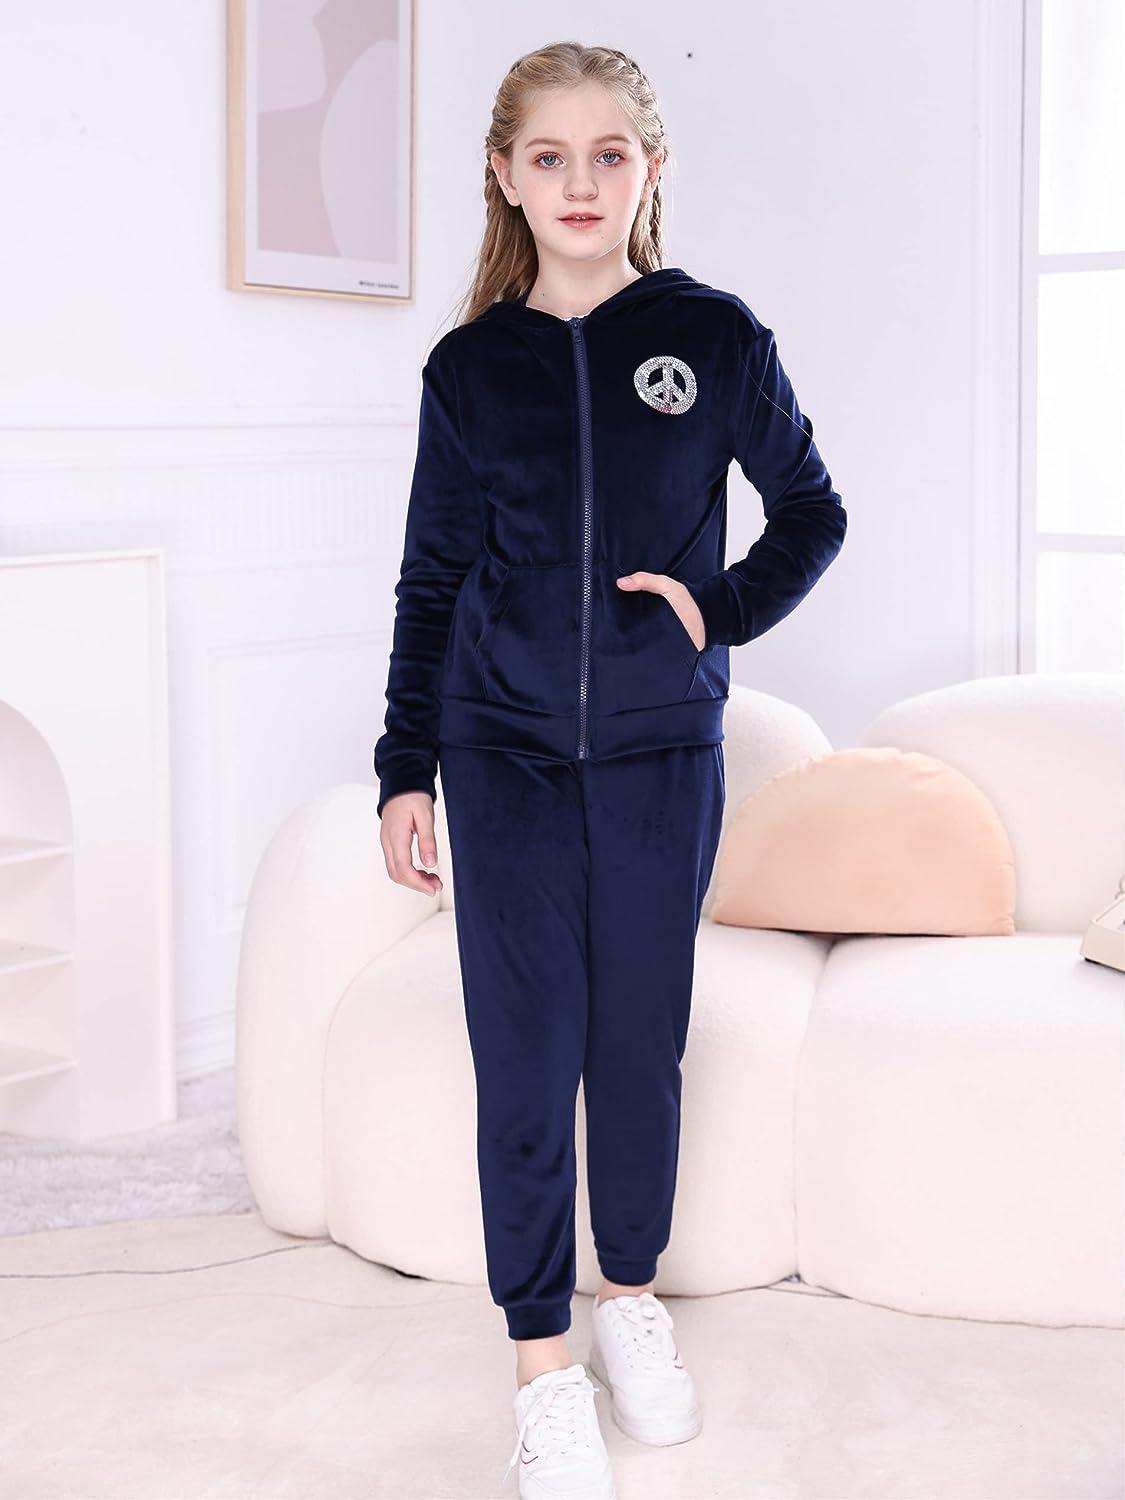 V.&GRIN Girls Tracksuit 2 Piece Outfit Velour Zip Up Hooded